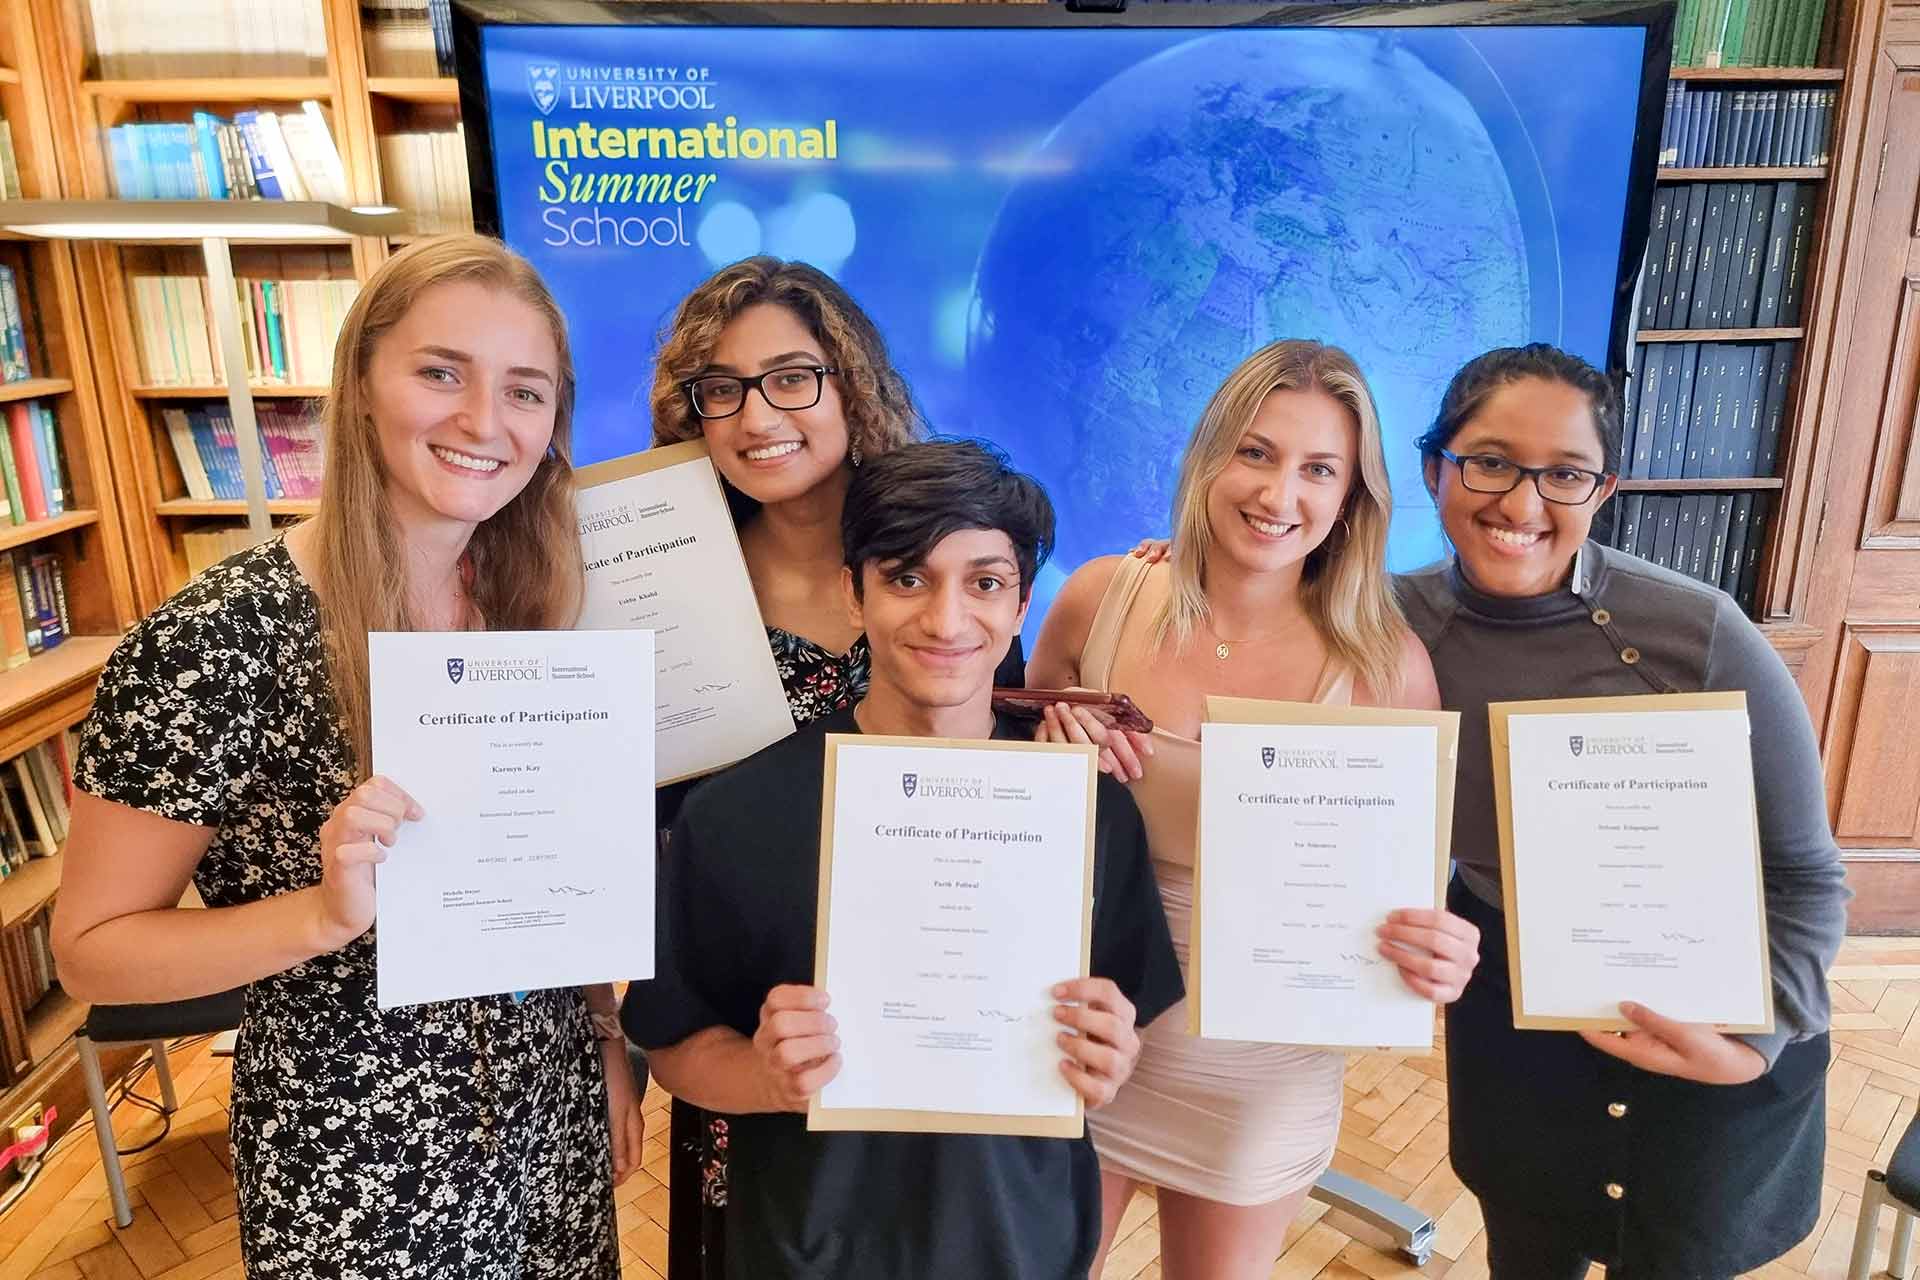 Students smiling and holding their certificates at the International Summer School's certificate event at the University of Liverpool